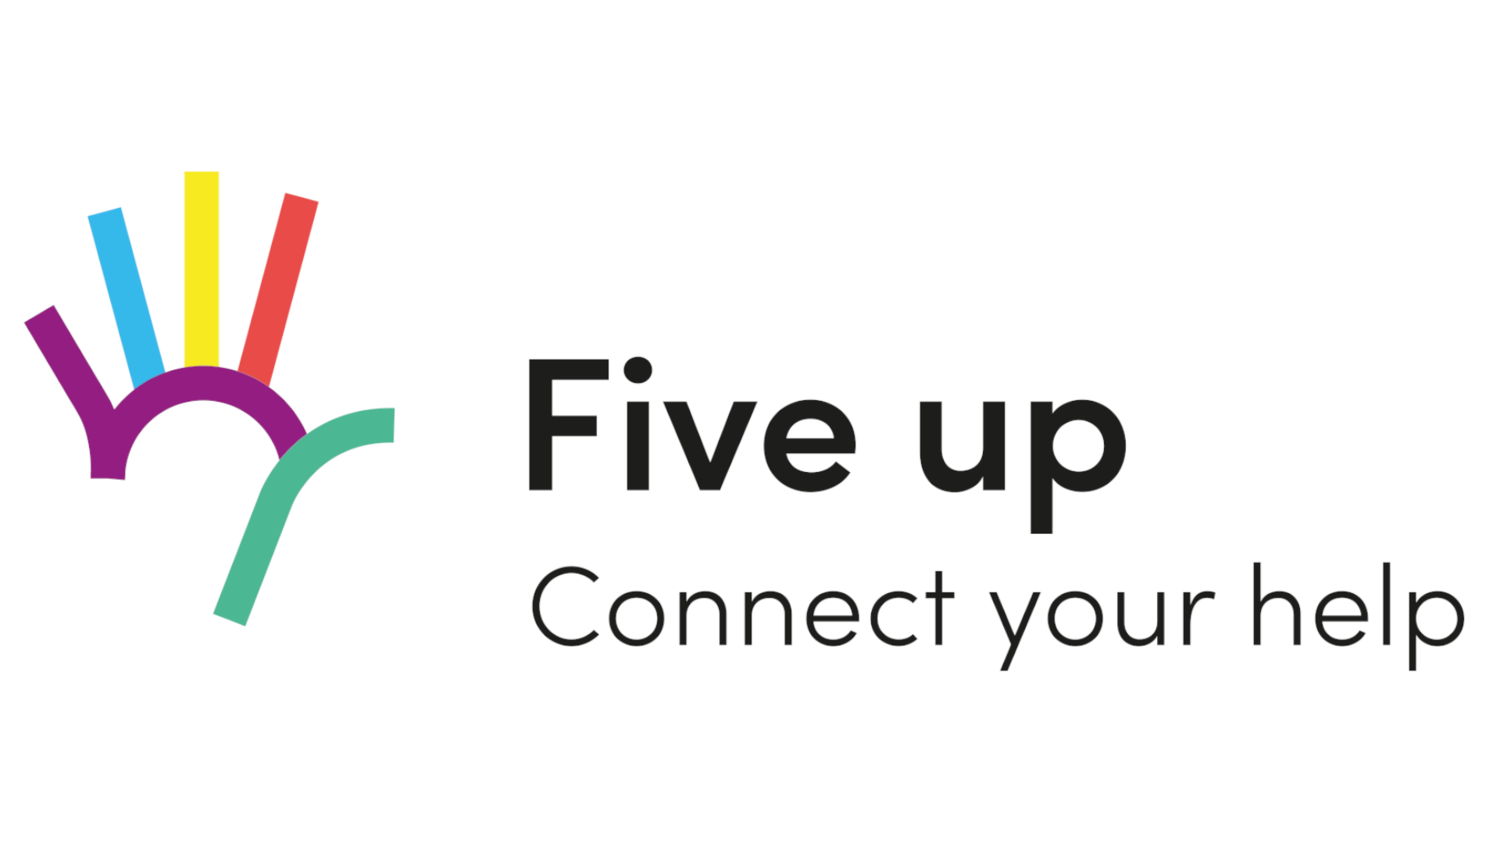 Five up - Connect your help